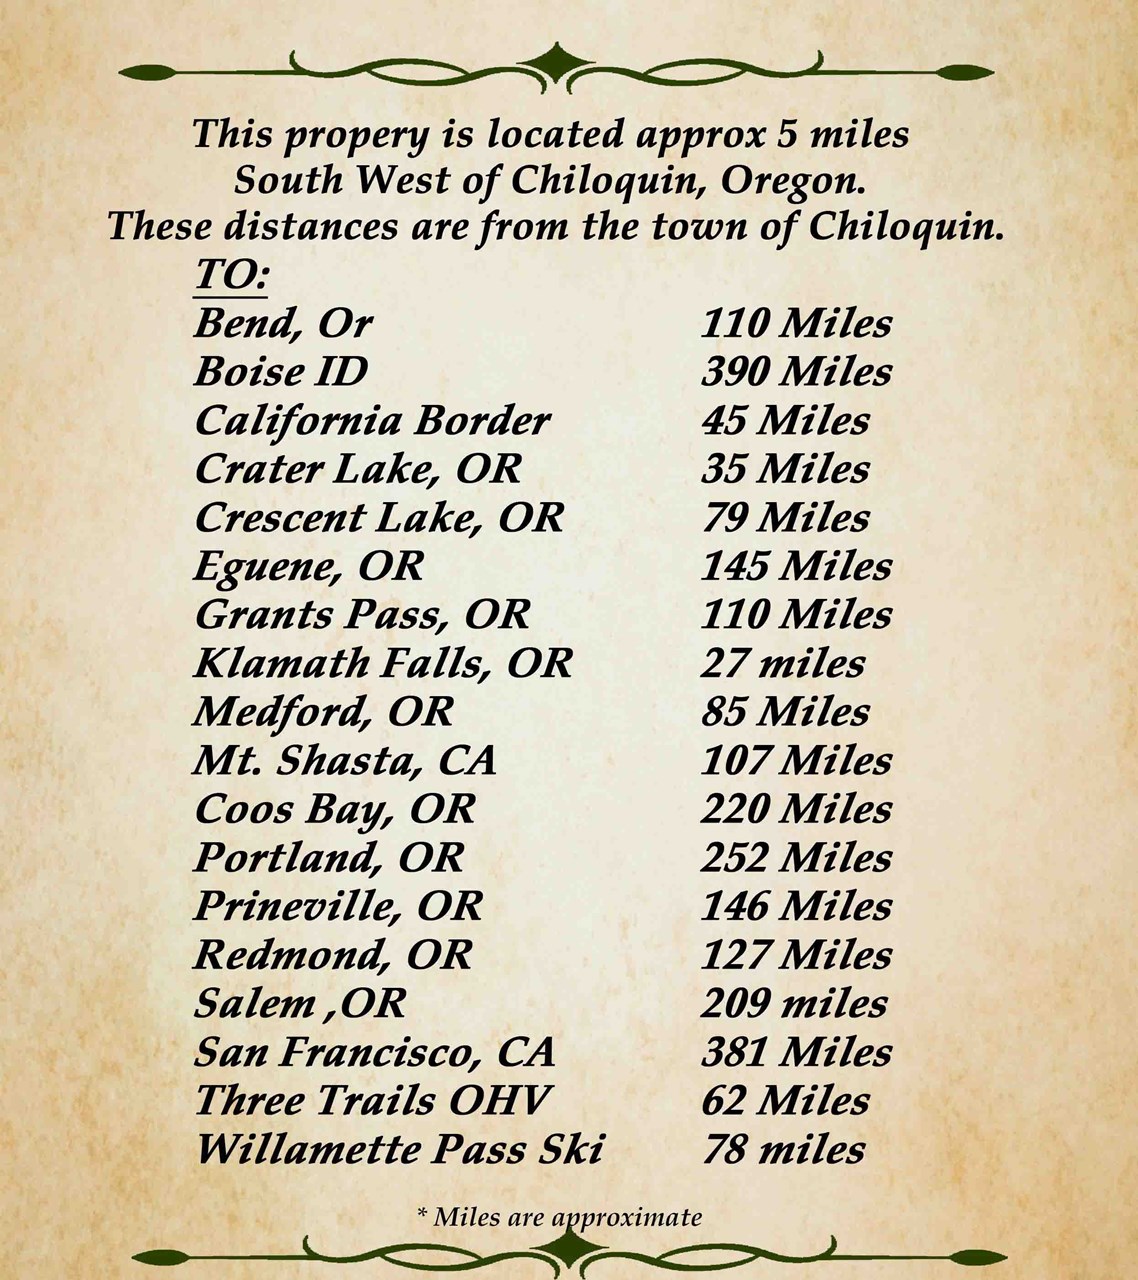 these distances are from the town of chiloquin, oregon, about 5 miles to the north east.